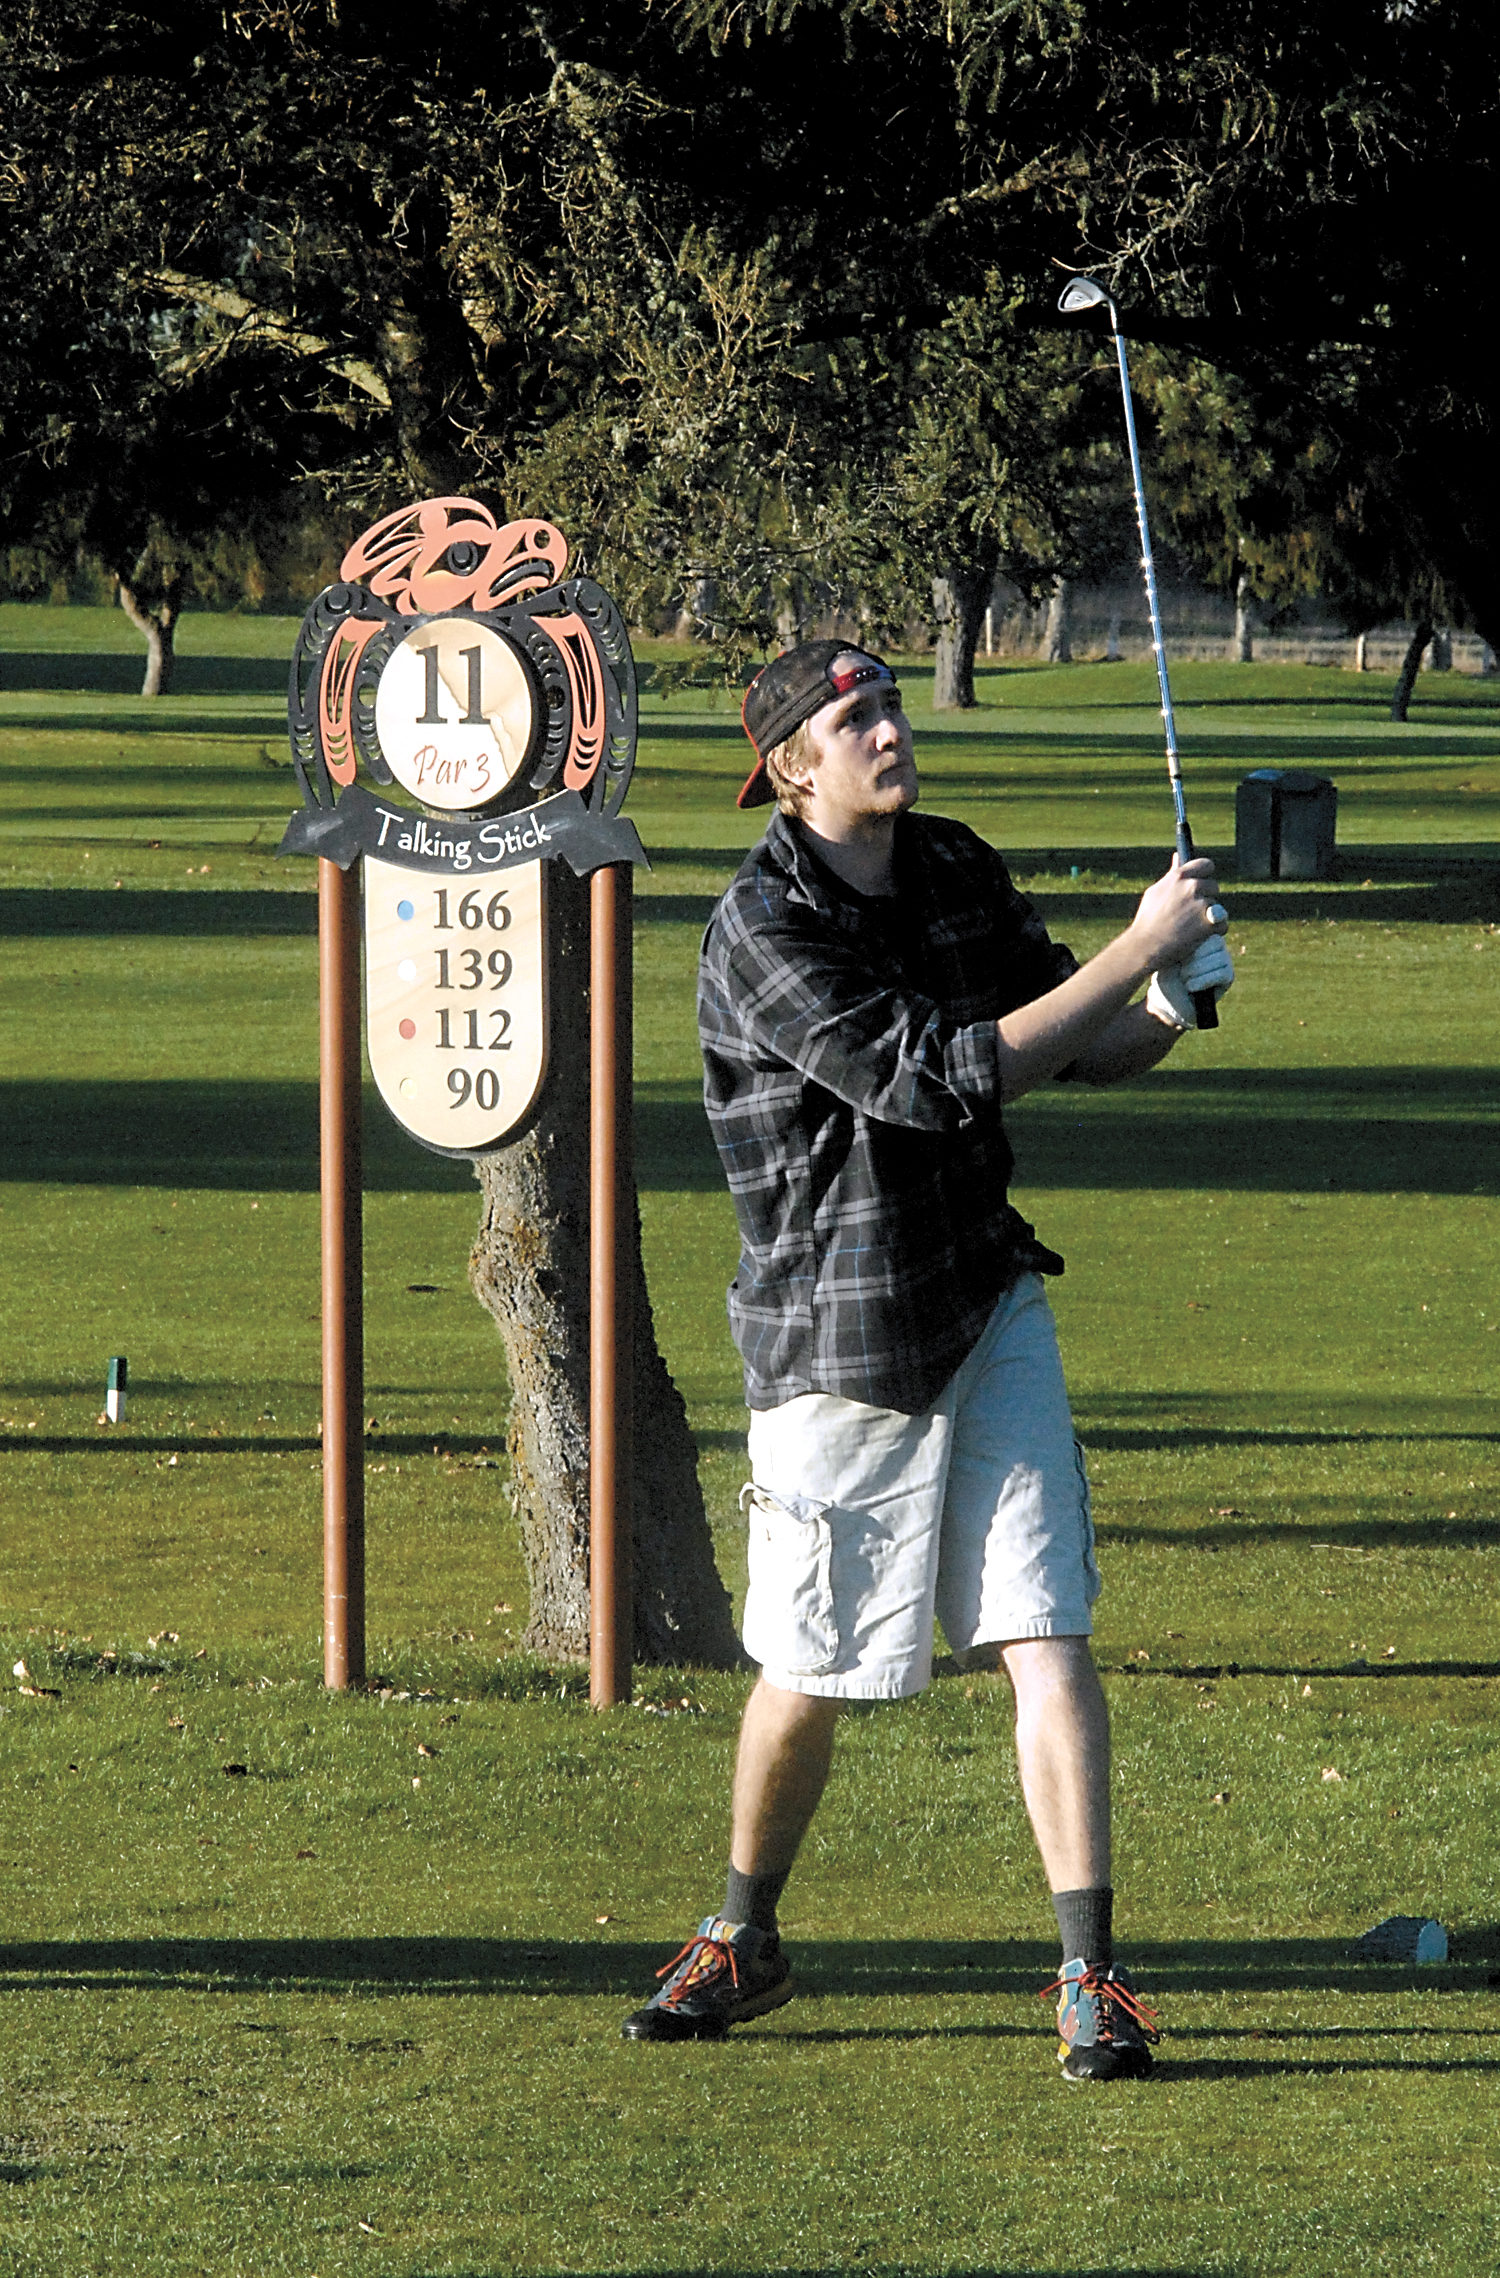 Jacob Haynes of Issaquah tees off on the 11th hole at The Cedars at Dungeness golf course near Sequim. — Keith Thorpe/Peninsula Daily News